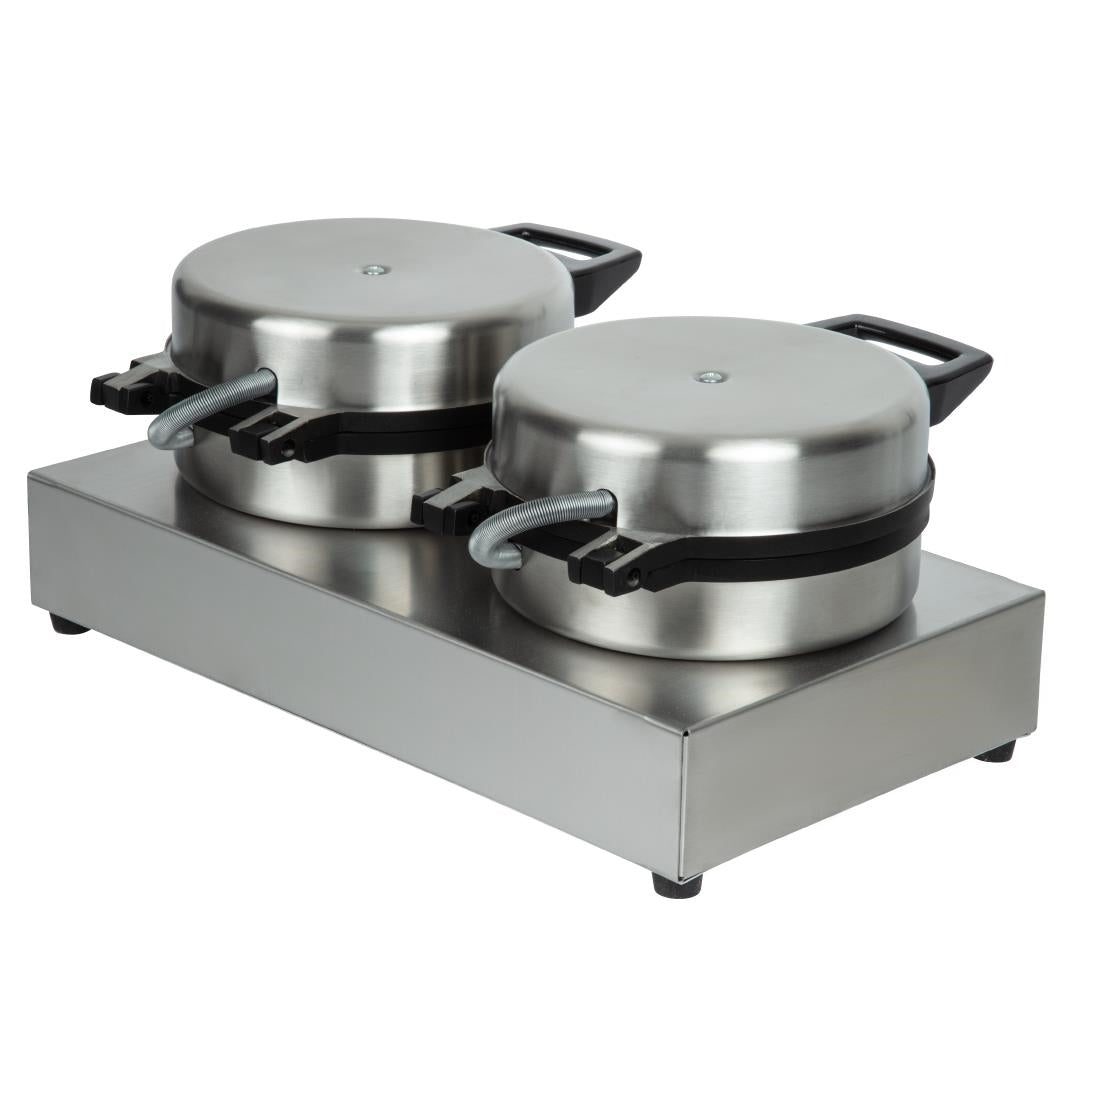 Dualit Contact Toaster 73002 JD Catering Equipment Solutions Ltd